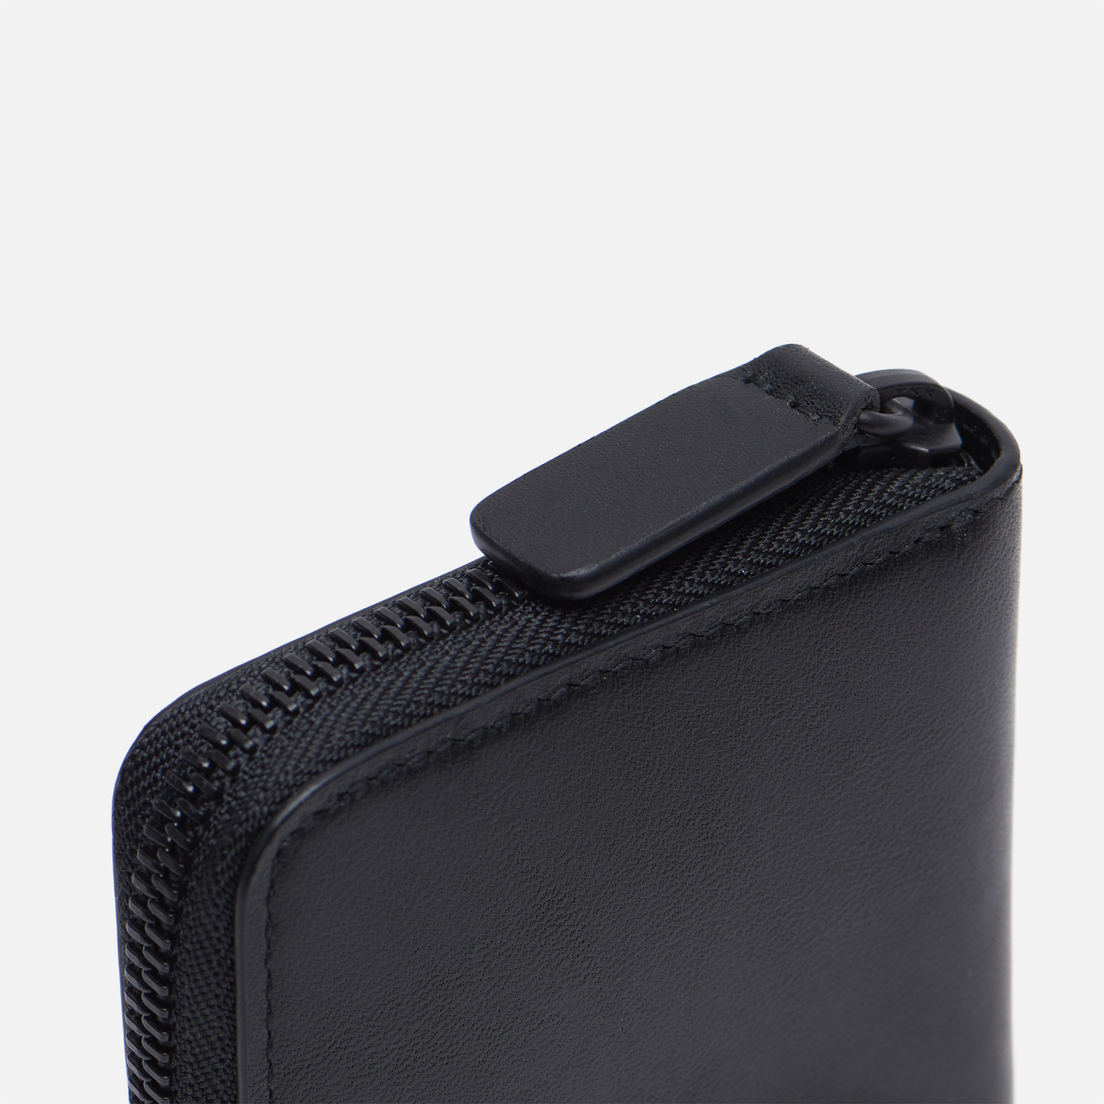 Common Projects Кошелек Zip Coin Case 9160